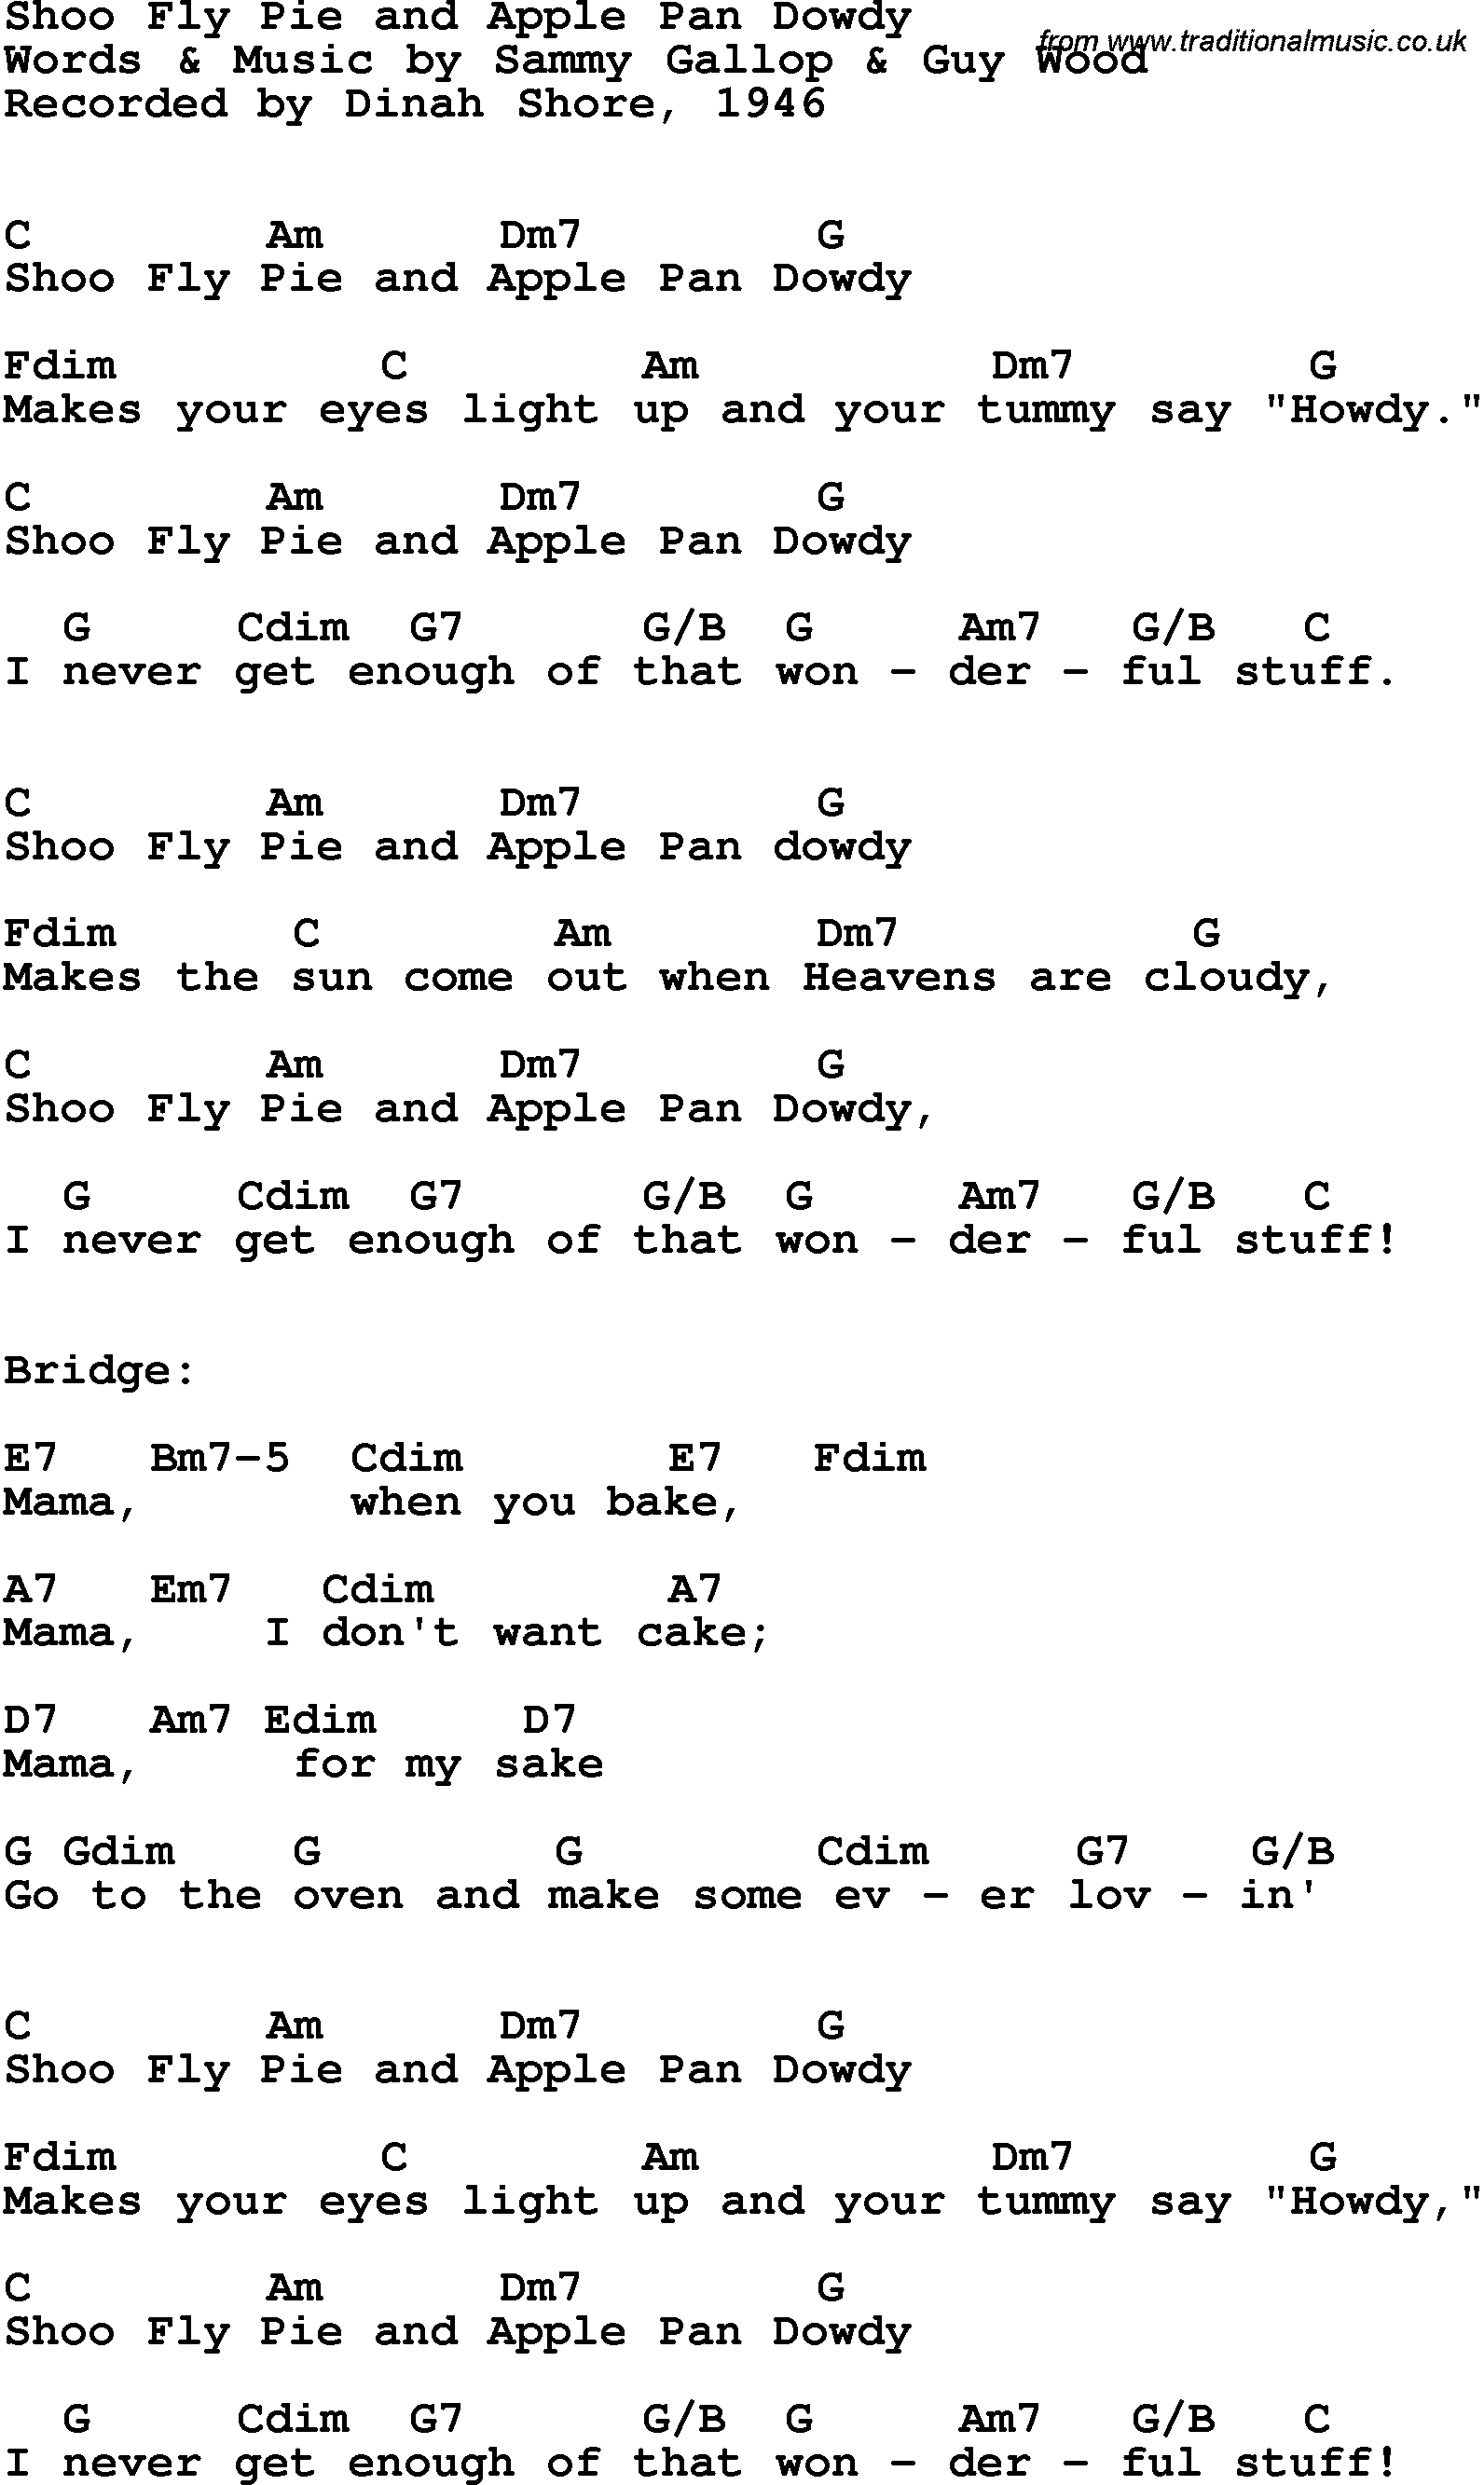 American Pie Chords Song Lyrics With Guitar Chords For Shoo Fly Pie Dinah Shore 1945